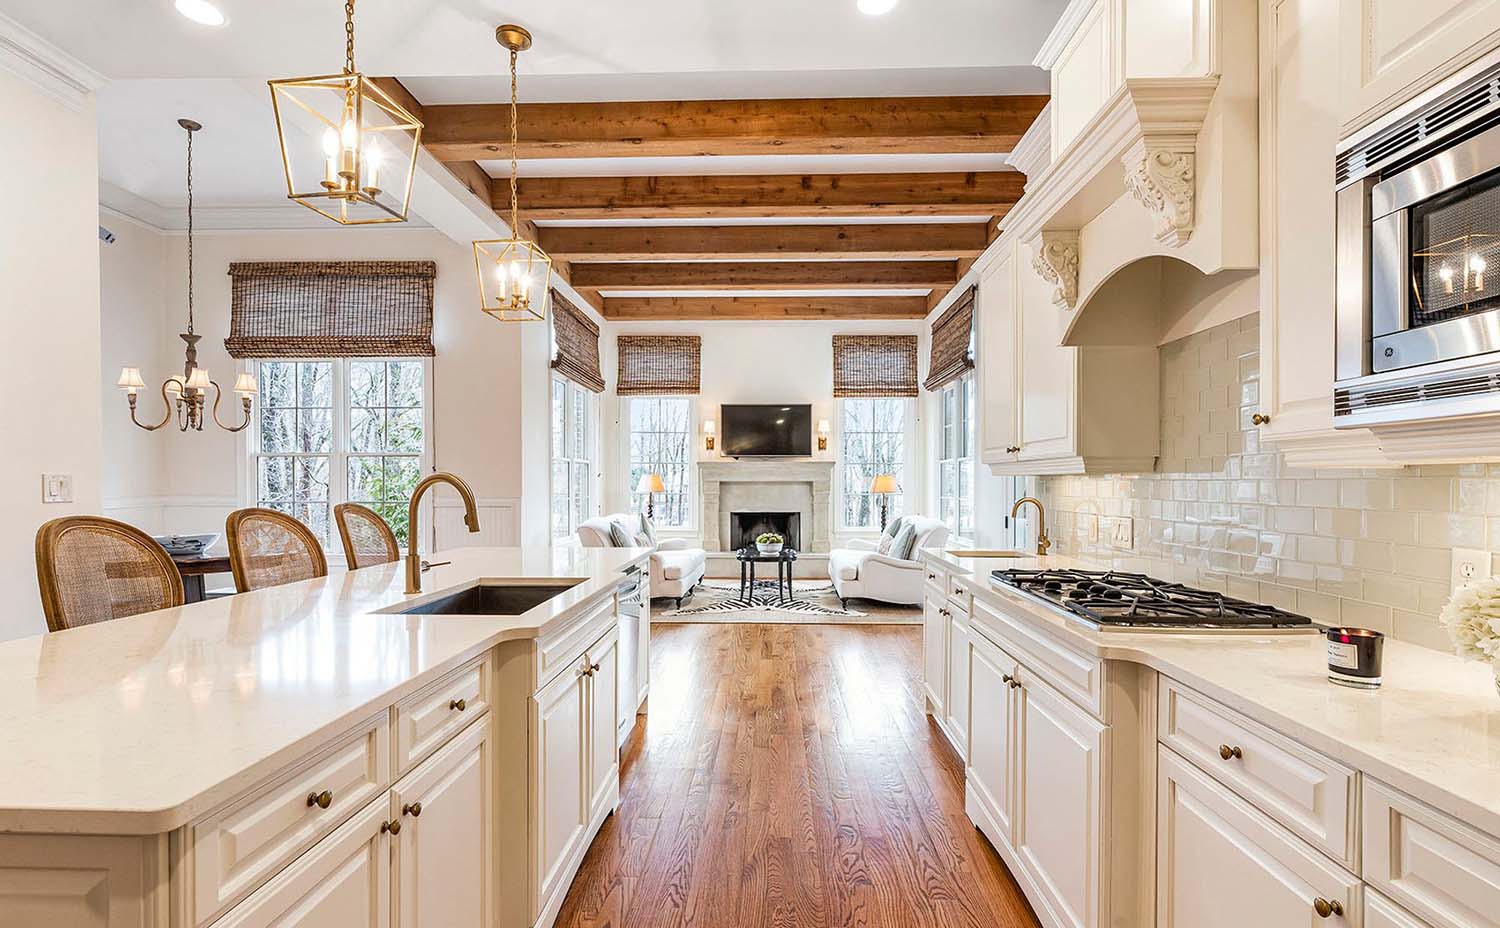 Wood Beam Kitchen Ceiling | Exposed Beams In The Kitchen